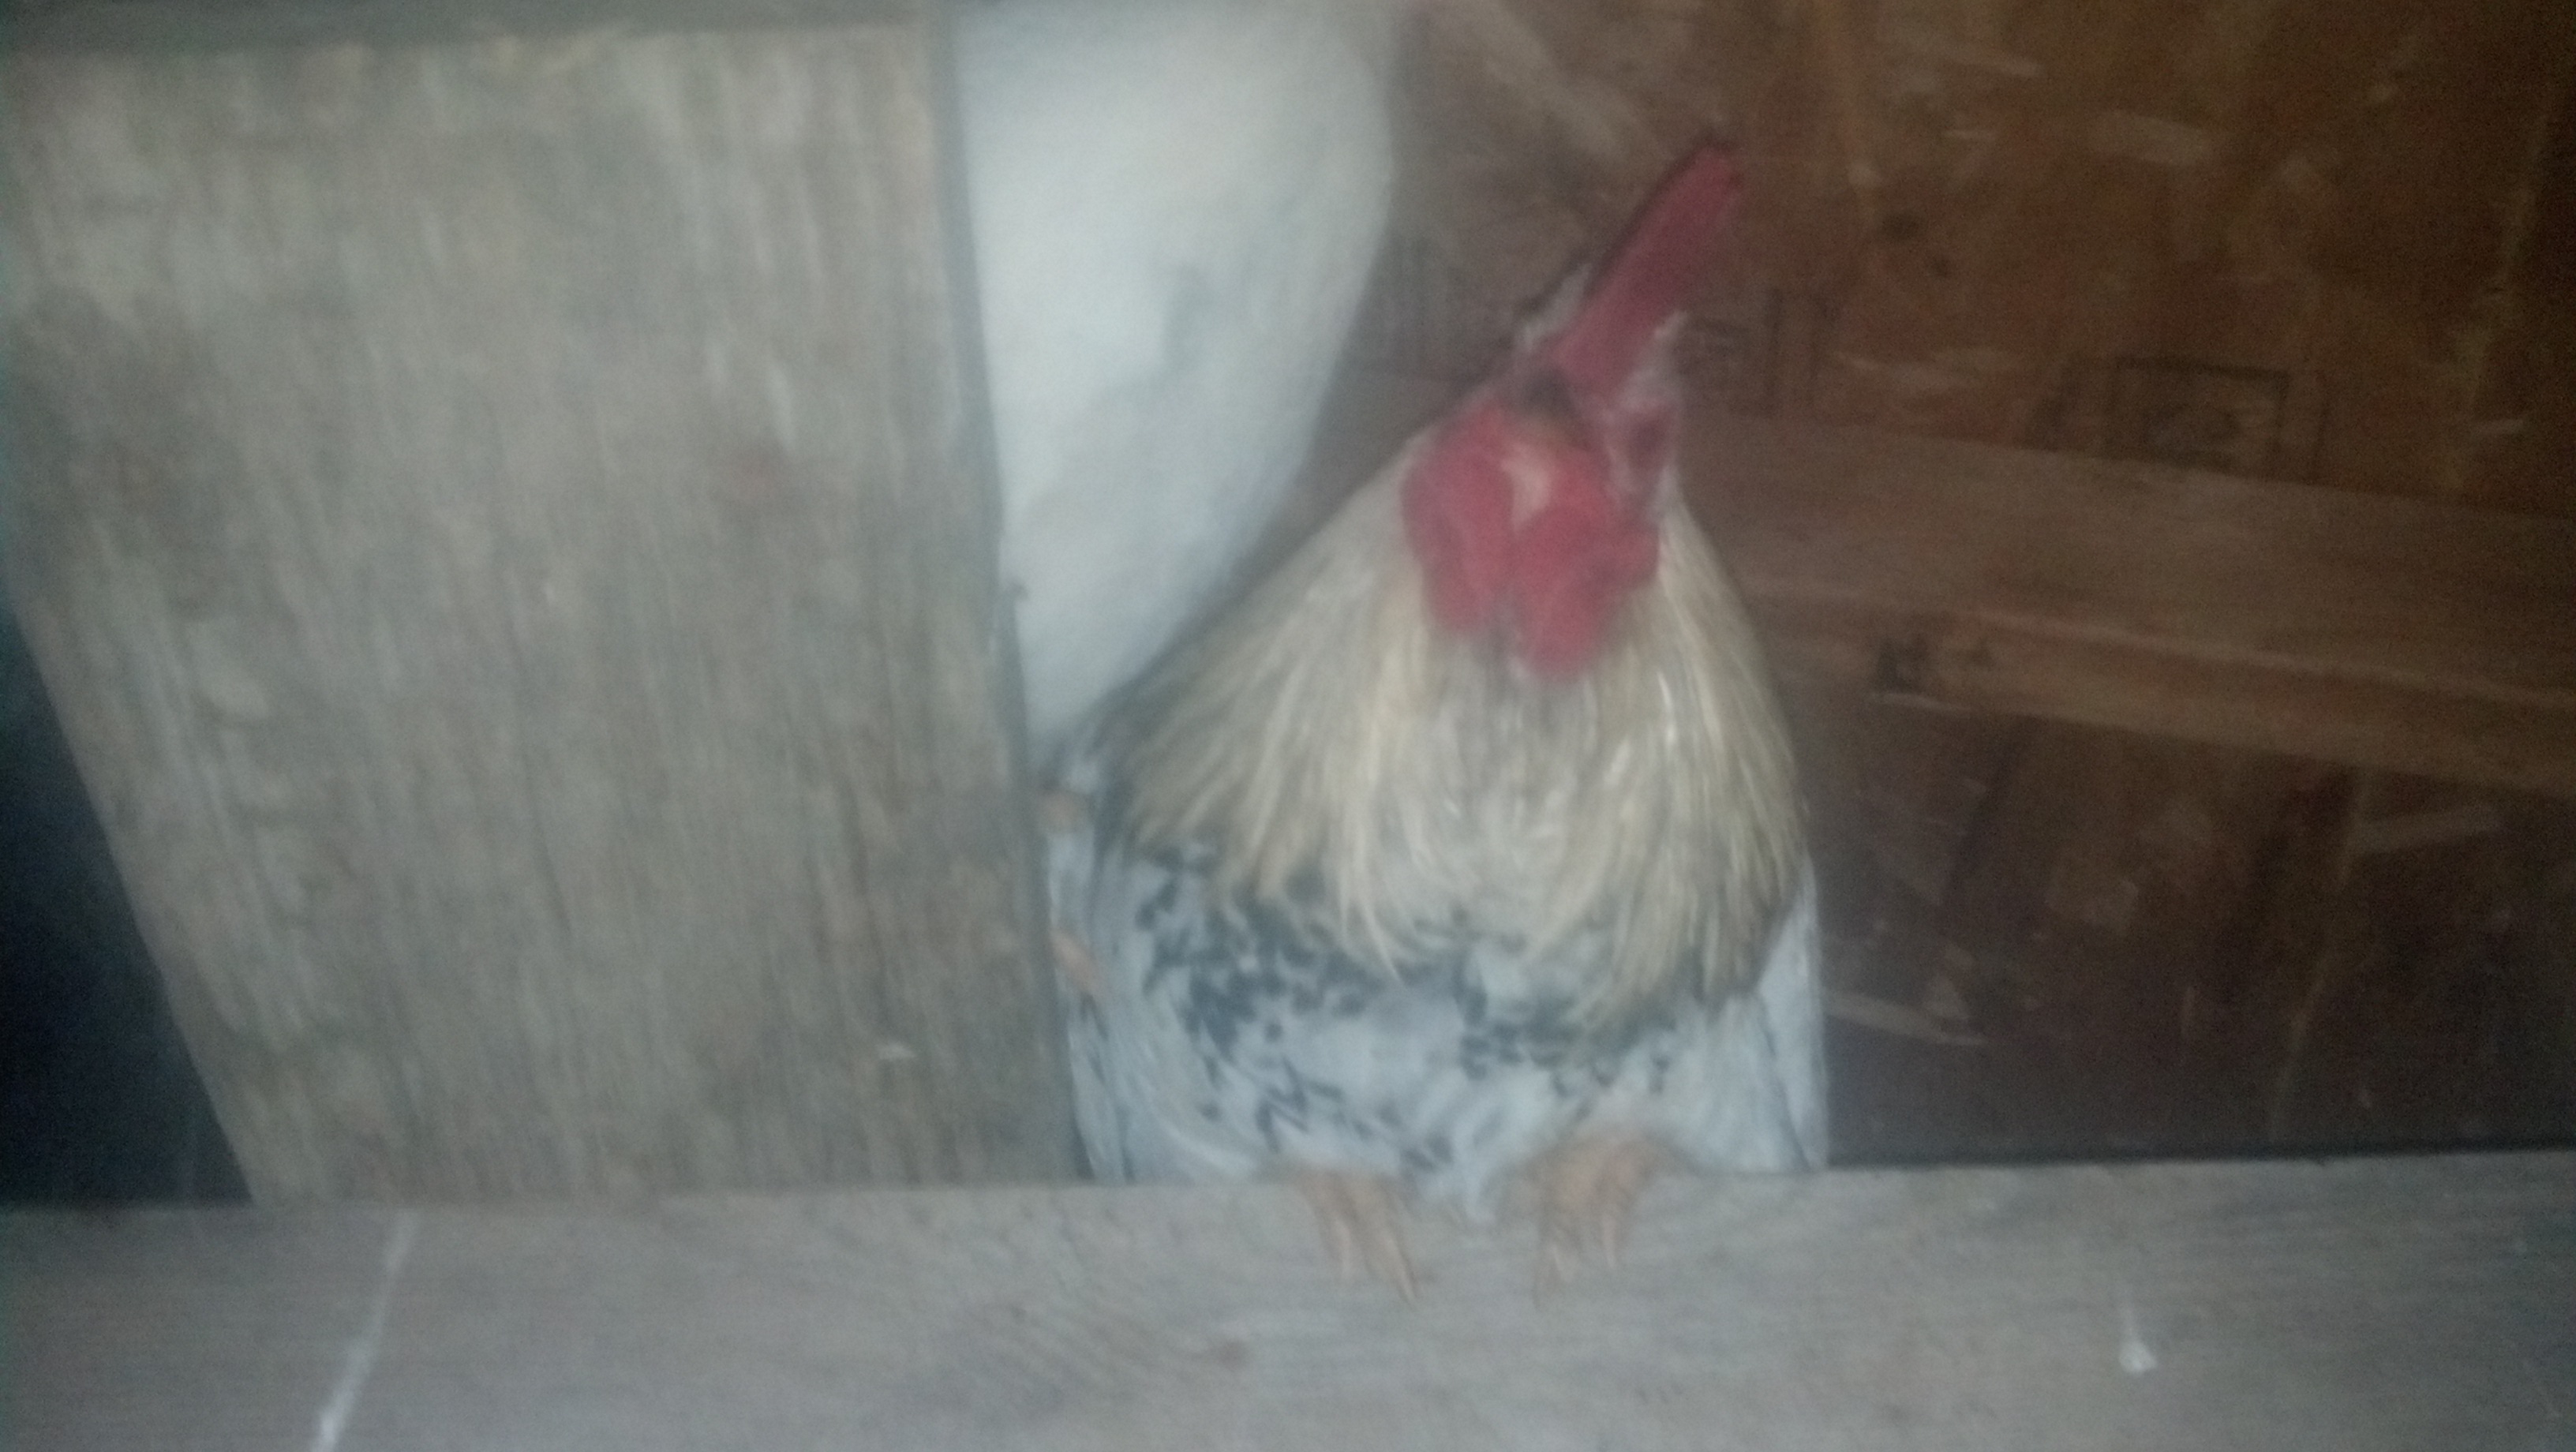 This is what you see as soon as you enter the coop ..